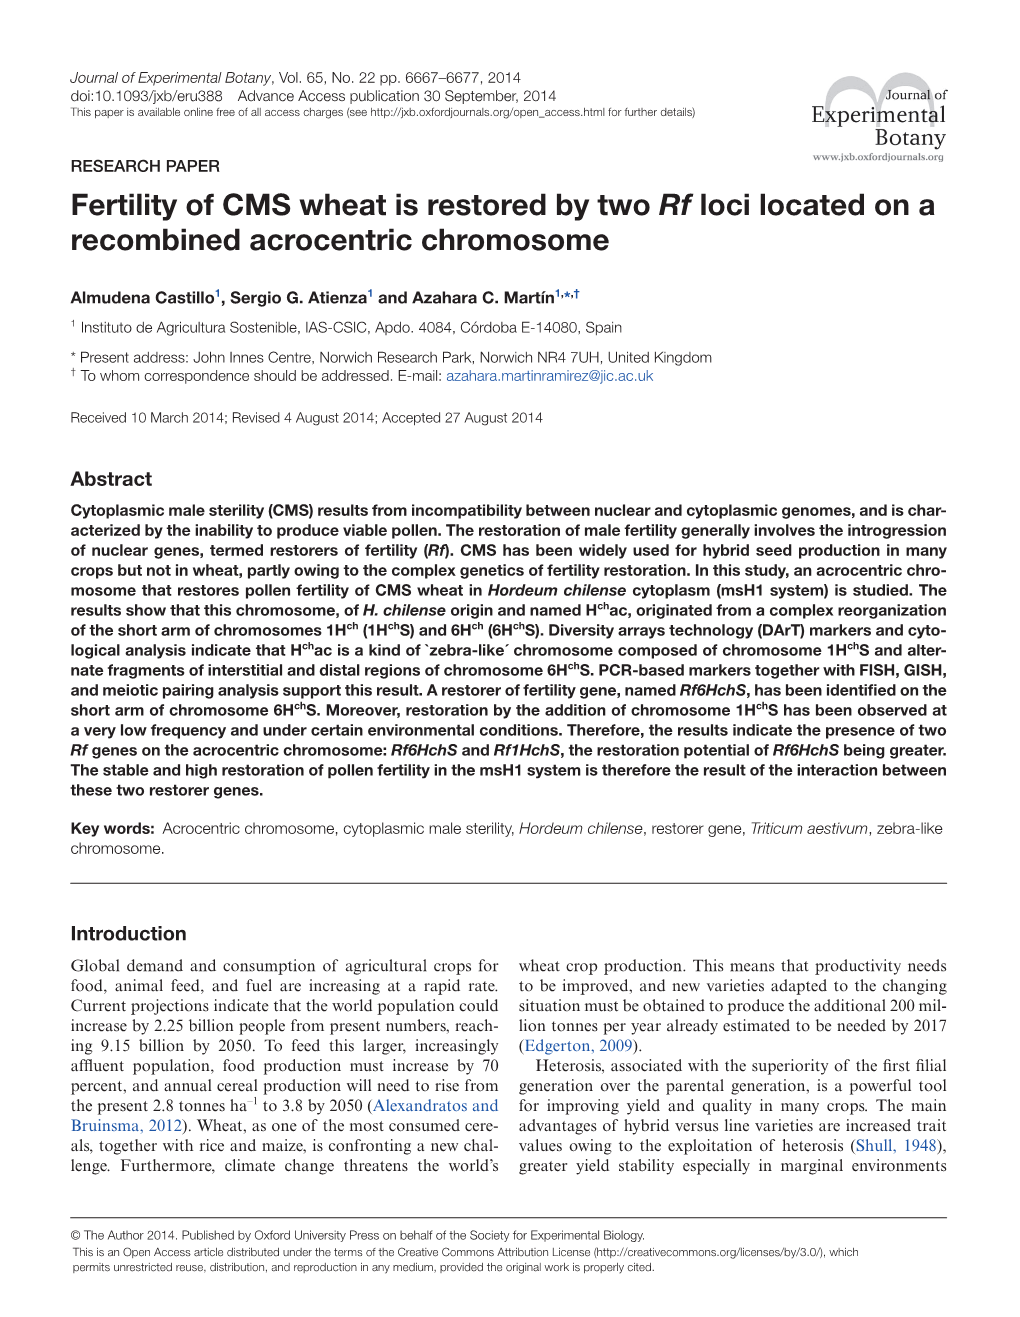 Fertility of CMS Wheat Is Restored by Two Rf Loci Located on a Recombined Acrocentric Chromosome